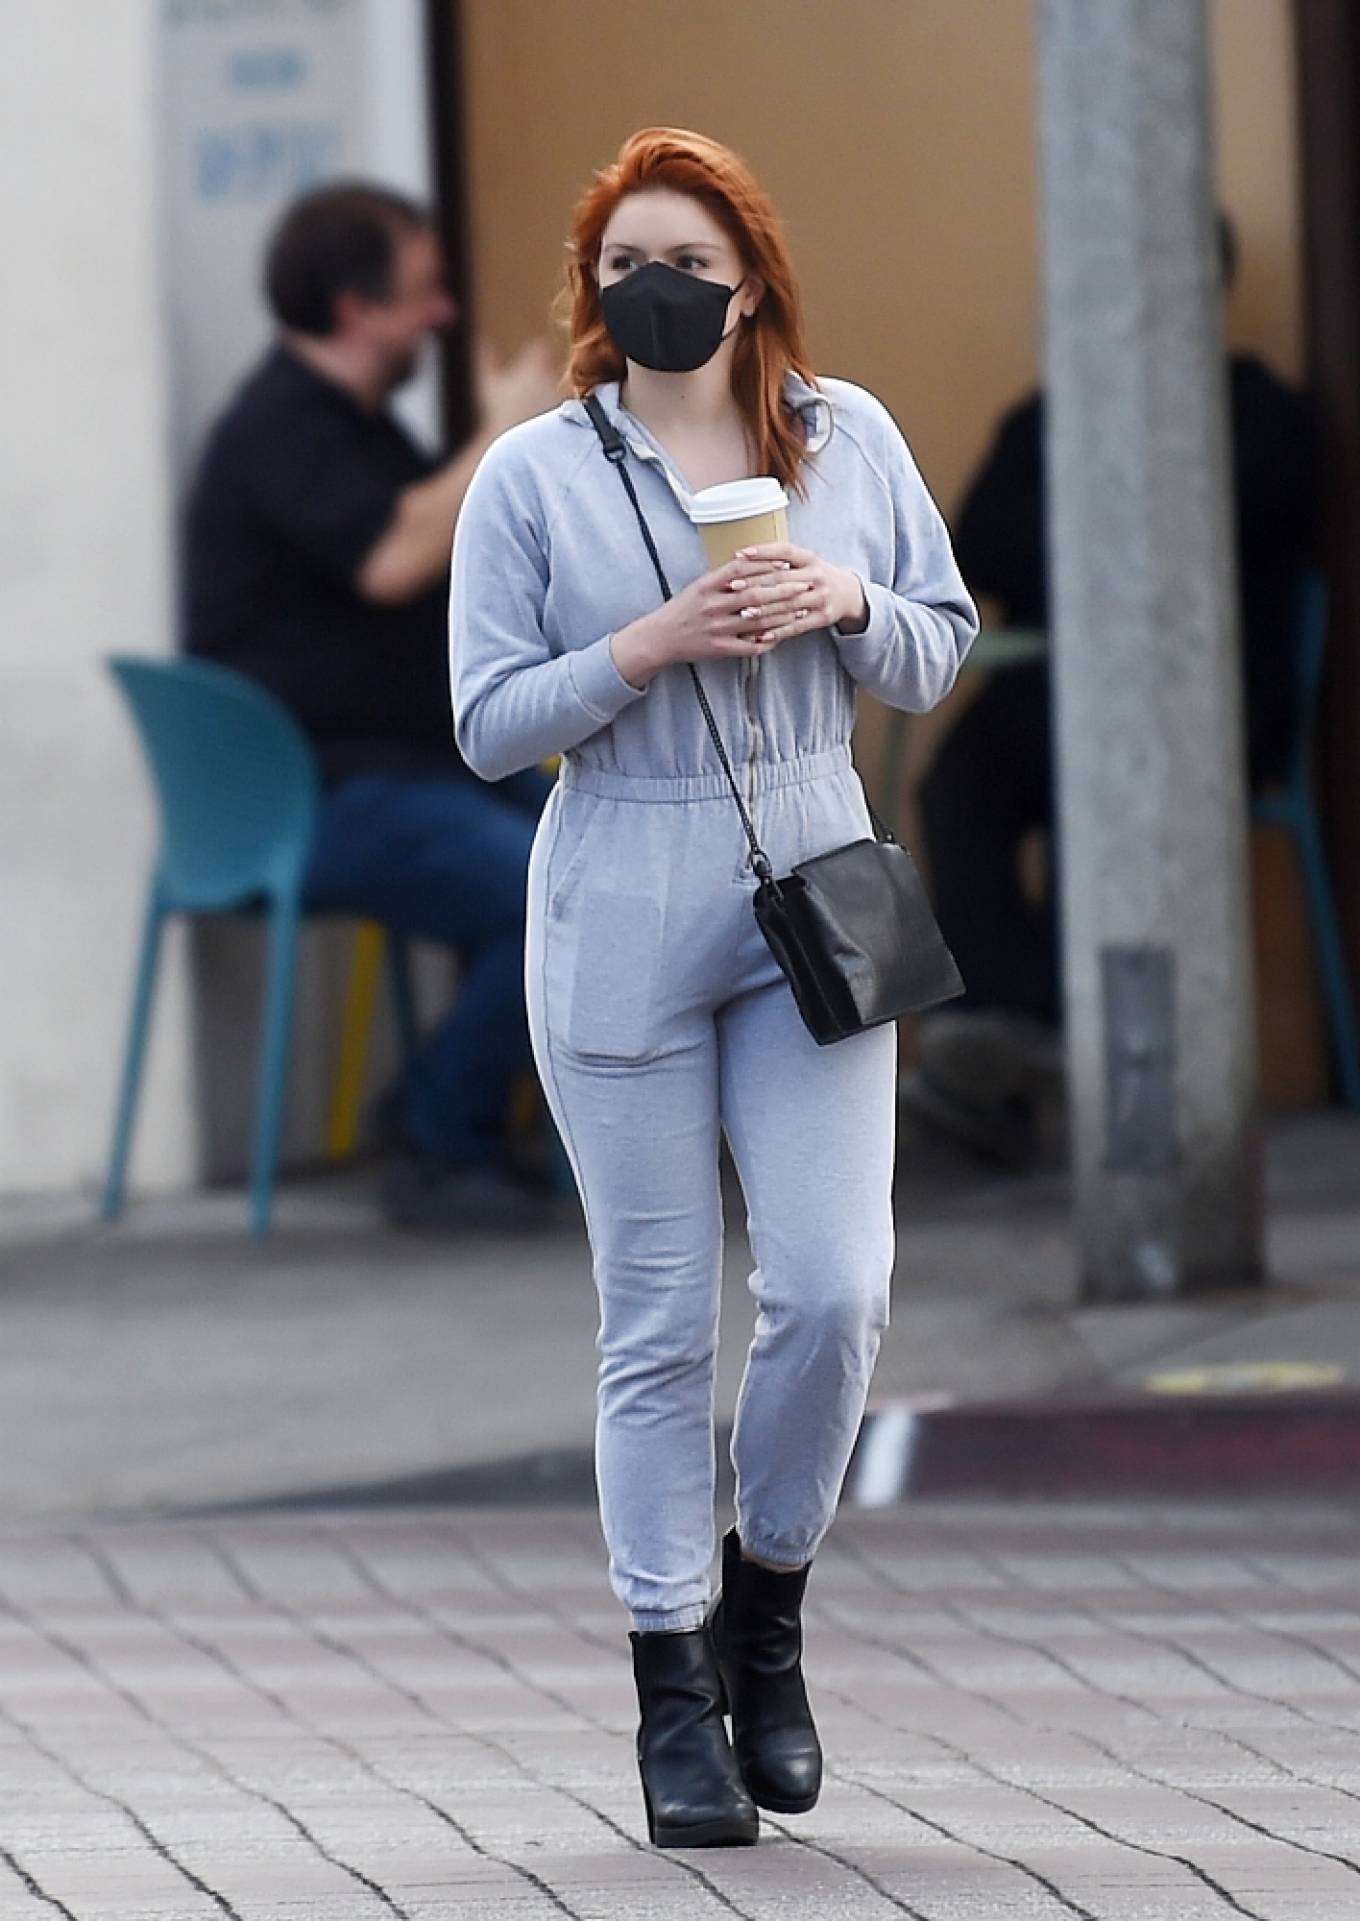 Ariel Winter 2021 : Ariel Winter – Grabs a cup of coffee in West Hollywood-06